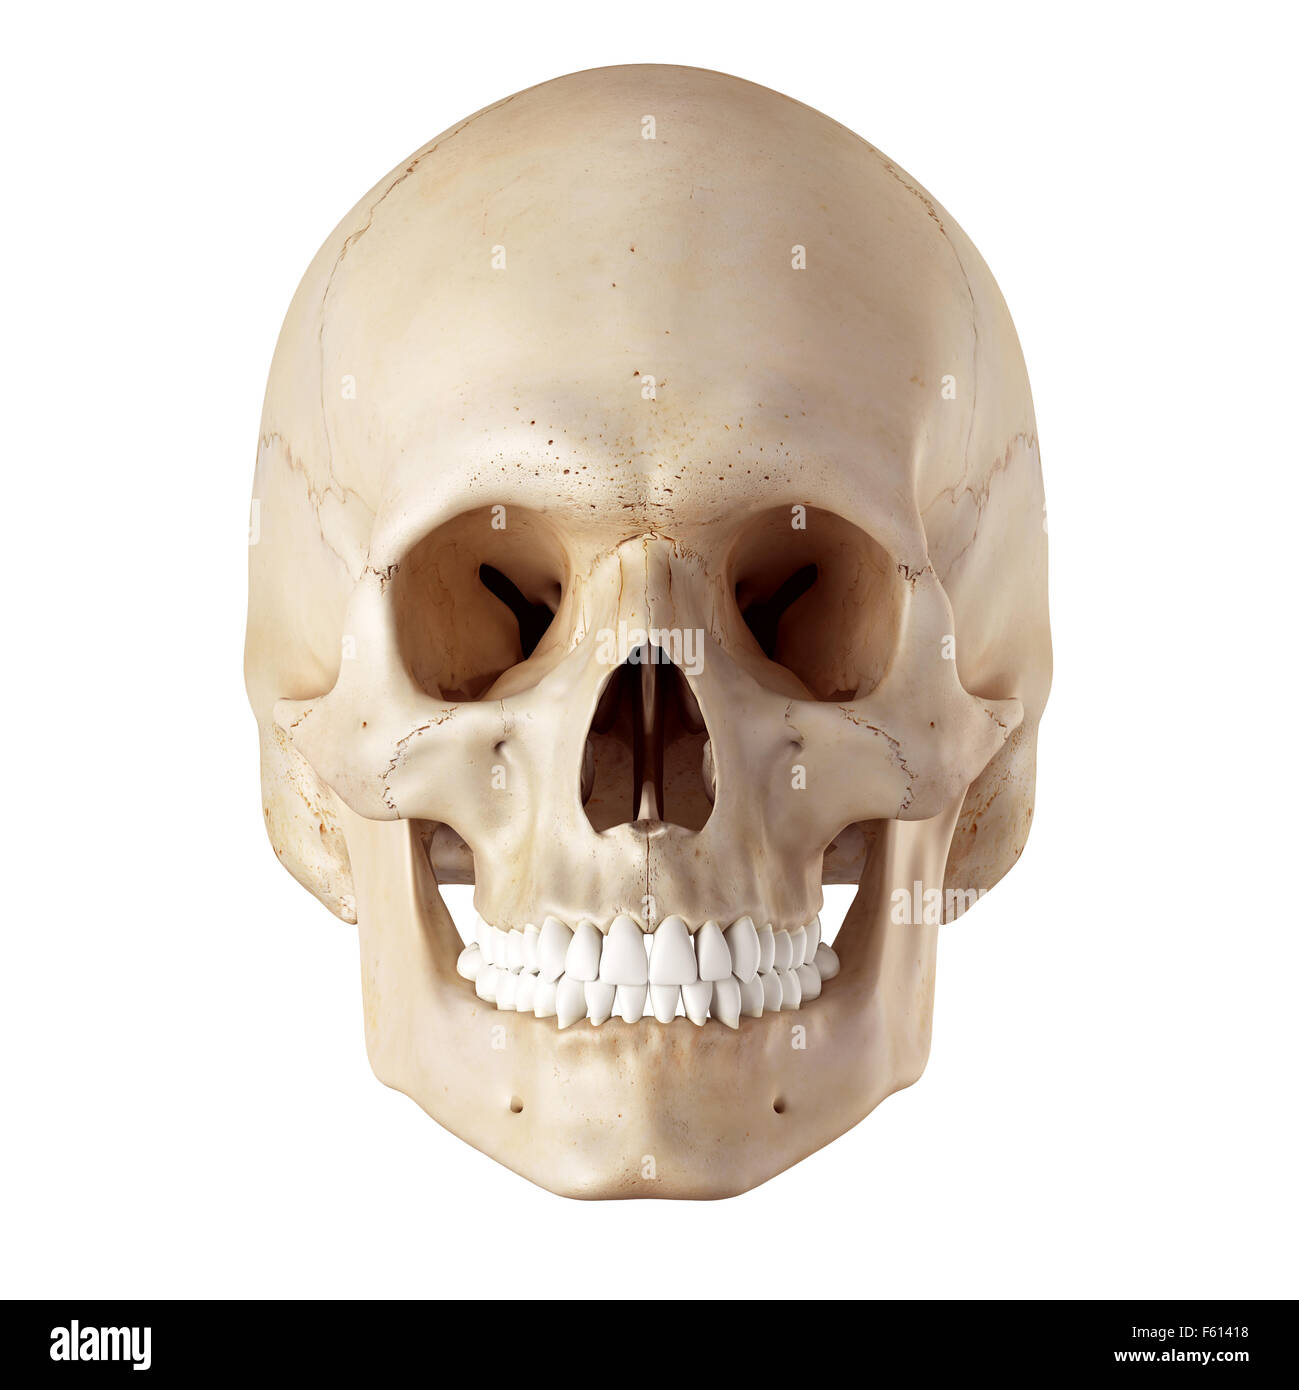 medical accurate illustration of the human skull Stock Photo